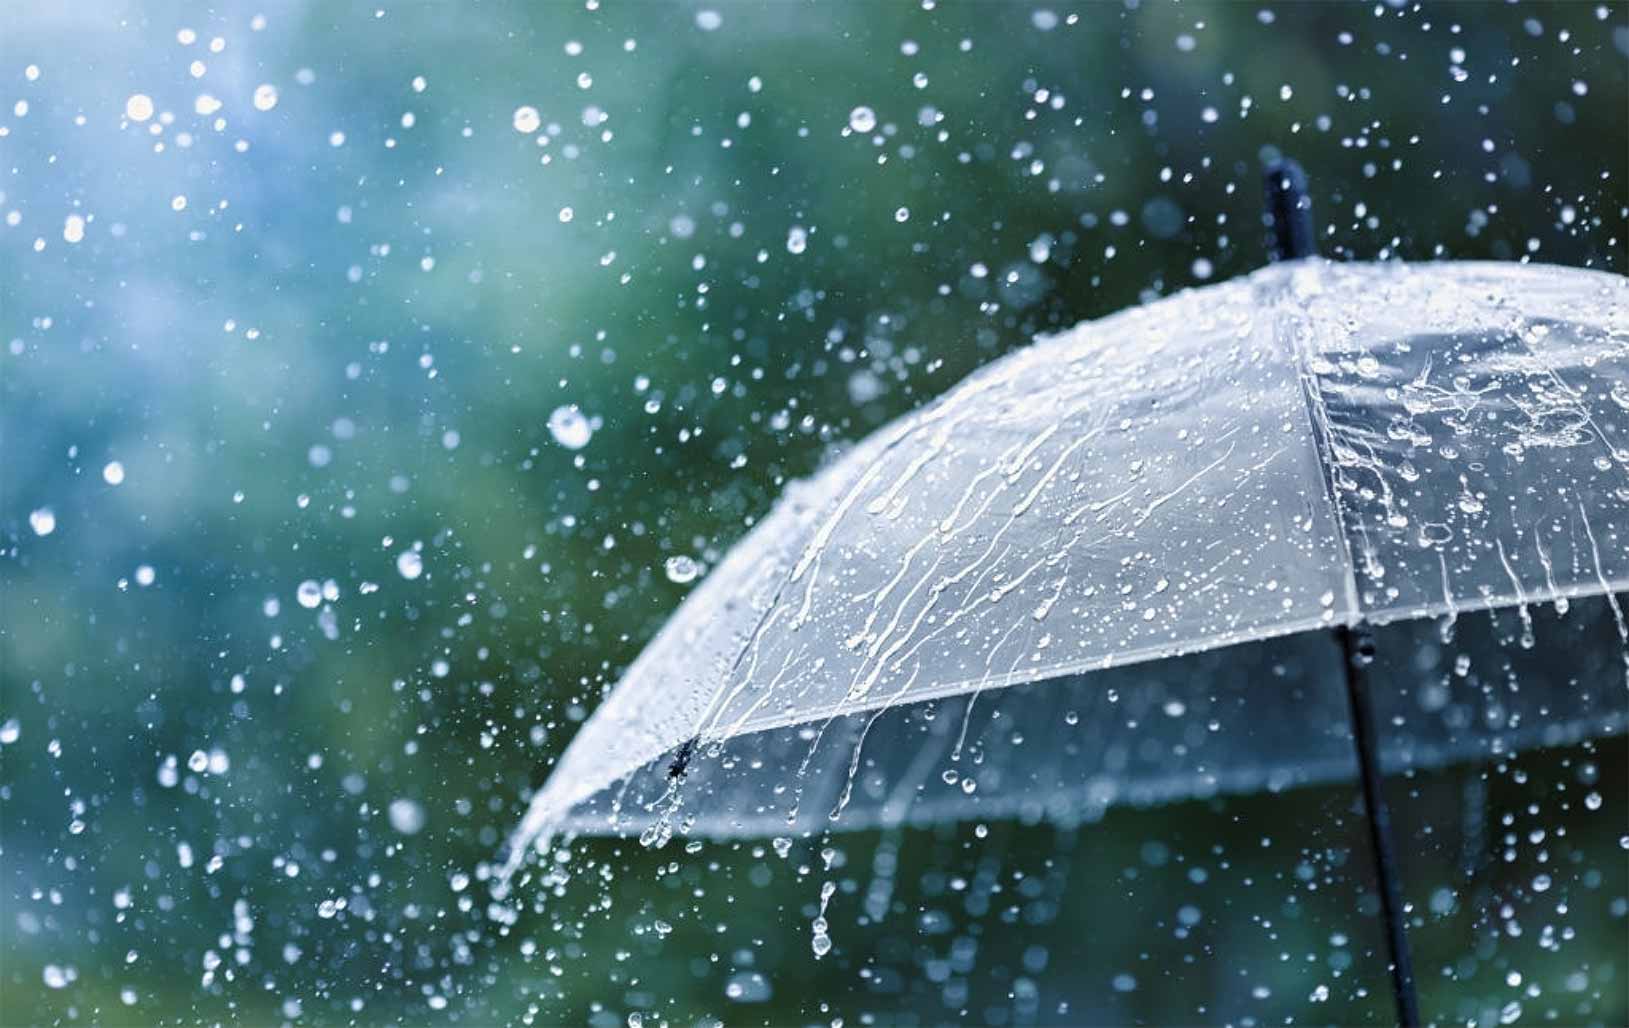 https://www.wellahealth.com/blog/wp-content/uploads/2021/09/6-ways-to-stay-healthy-during-the-rainy-season.jpg